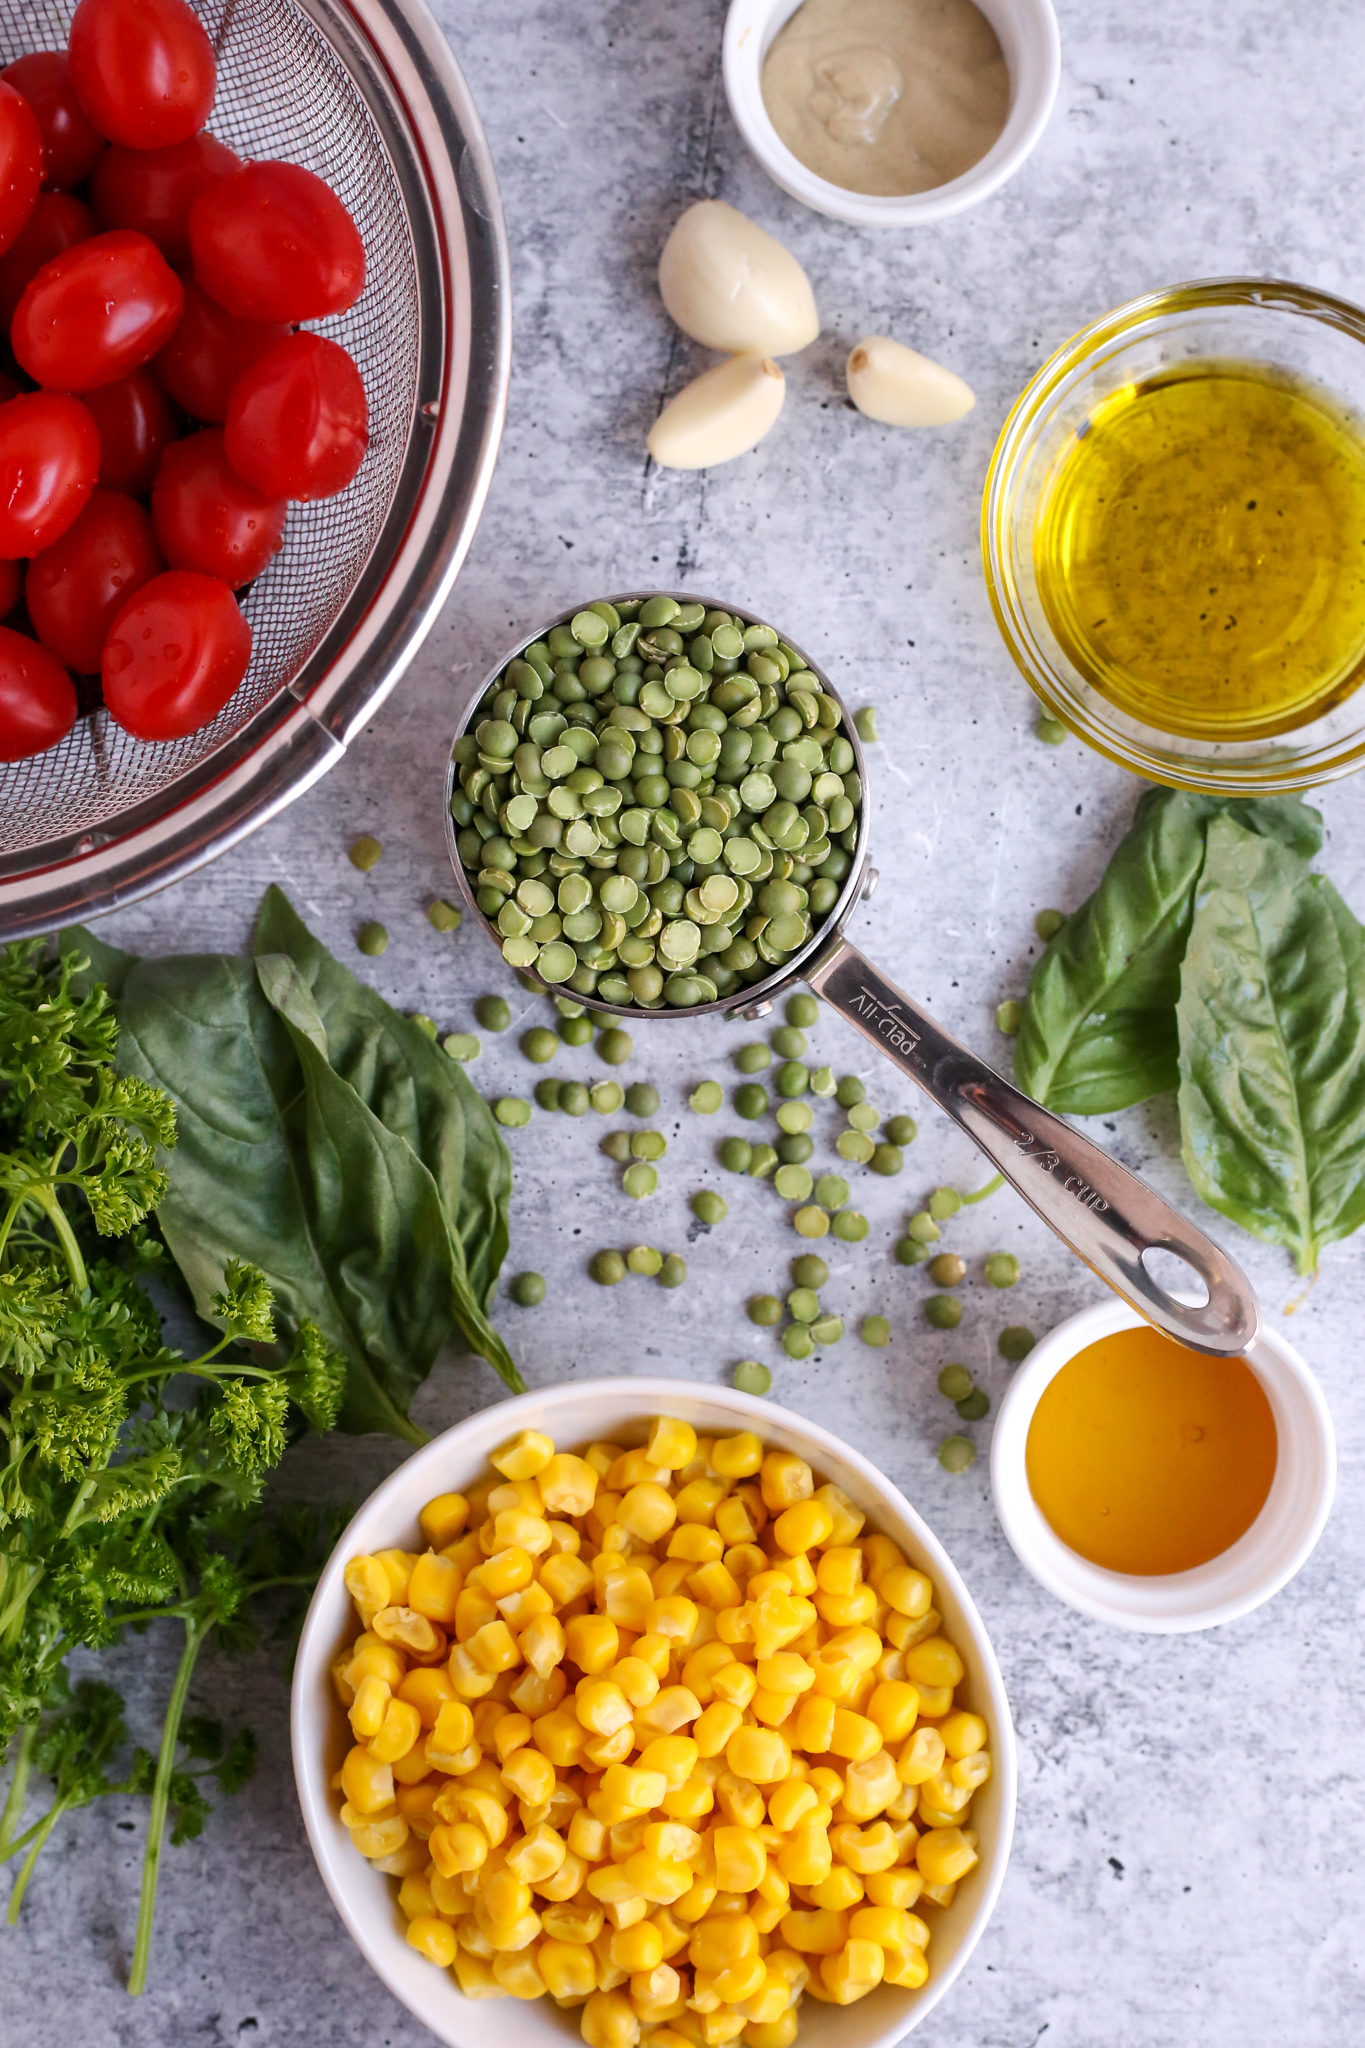 Arrangements on ingredients on a kitchen countertop, including uncooked green split peas, cheery tomatoes, garlic cloves, olive oil, fresh basil and parsley, and sweet corn